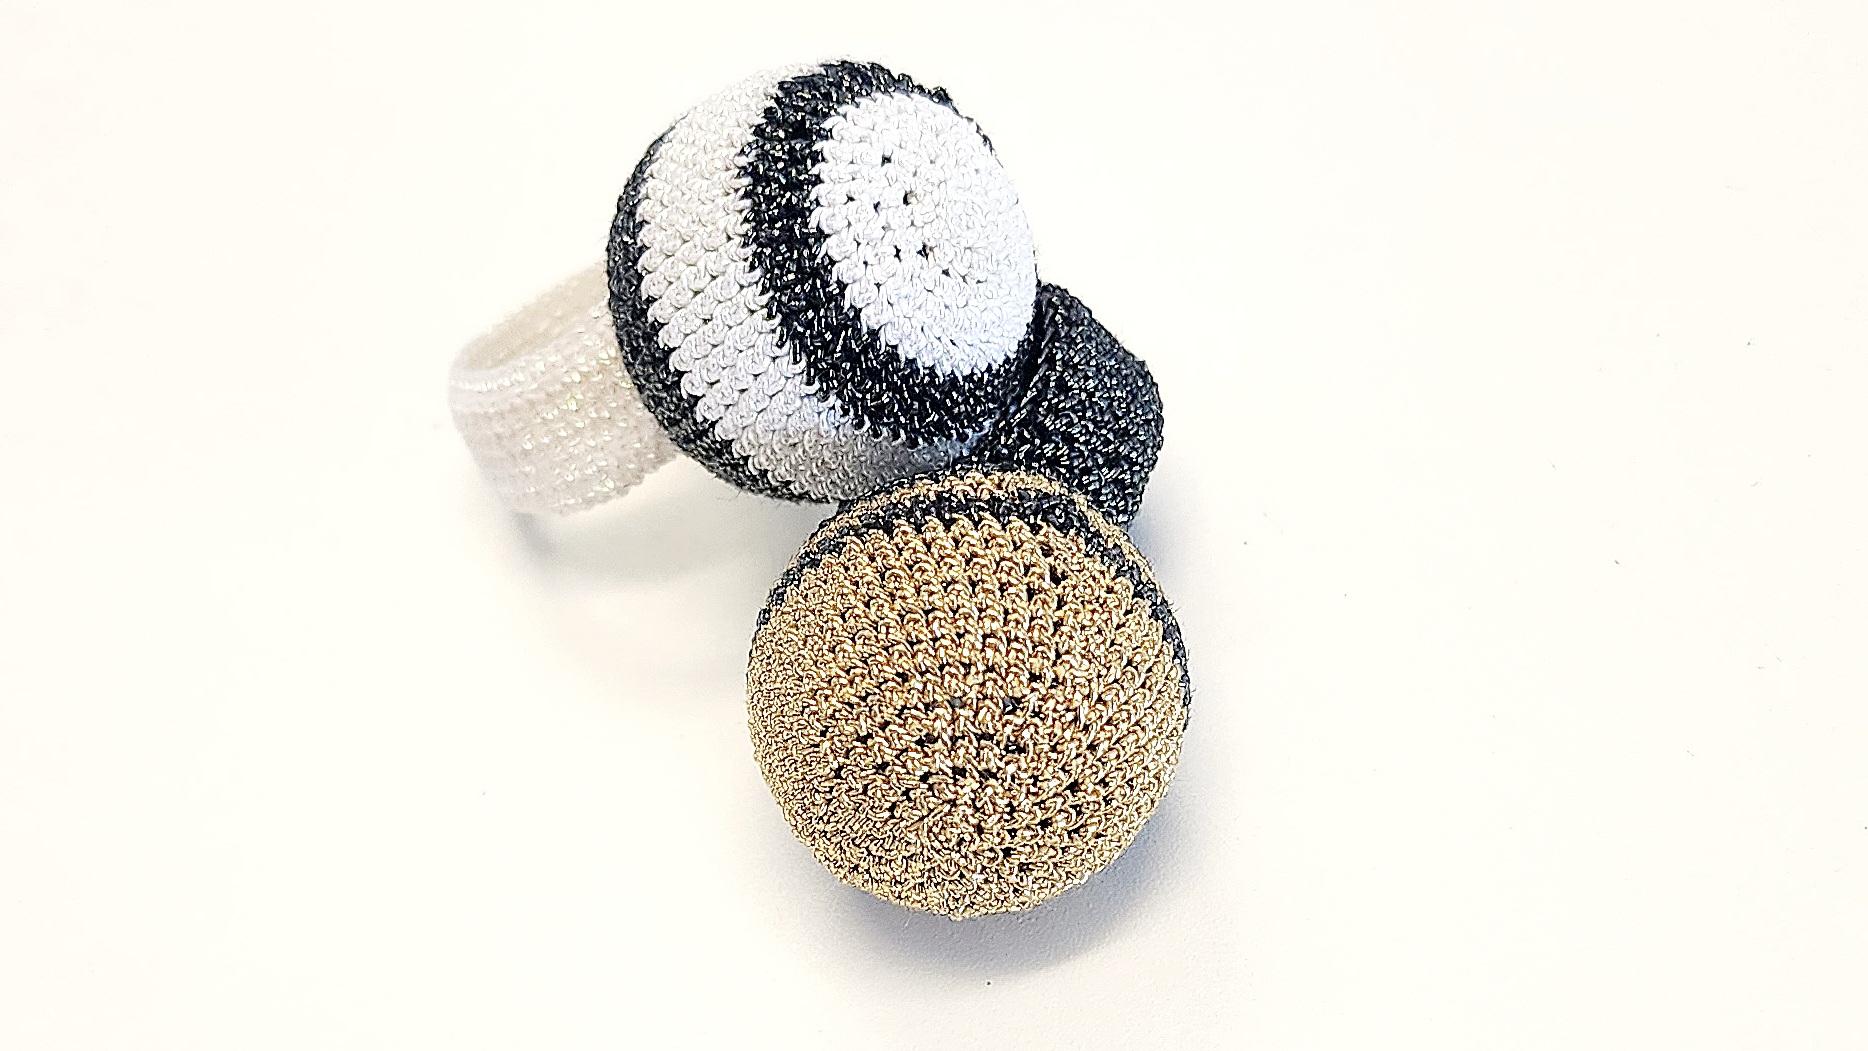 3 colorful crochet rings. The rings are crochet in different colors around a large round glass bead. The thread is a smooth passing thread. No metal content 
1 black and gold ring
2 black and white ring
3 gold, turquoise and white ring
Price is for